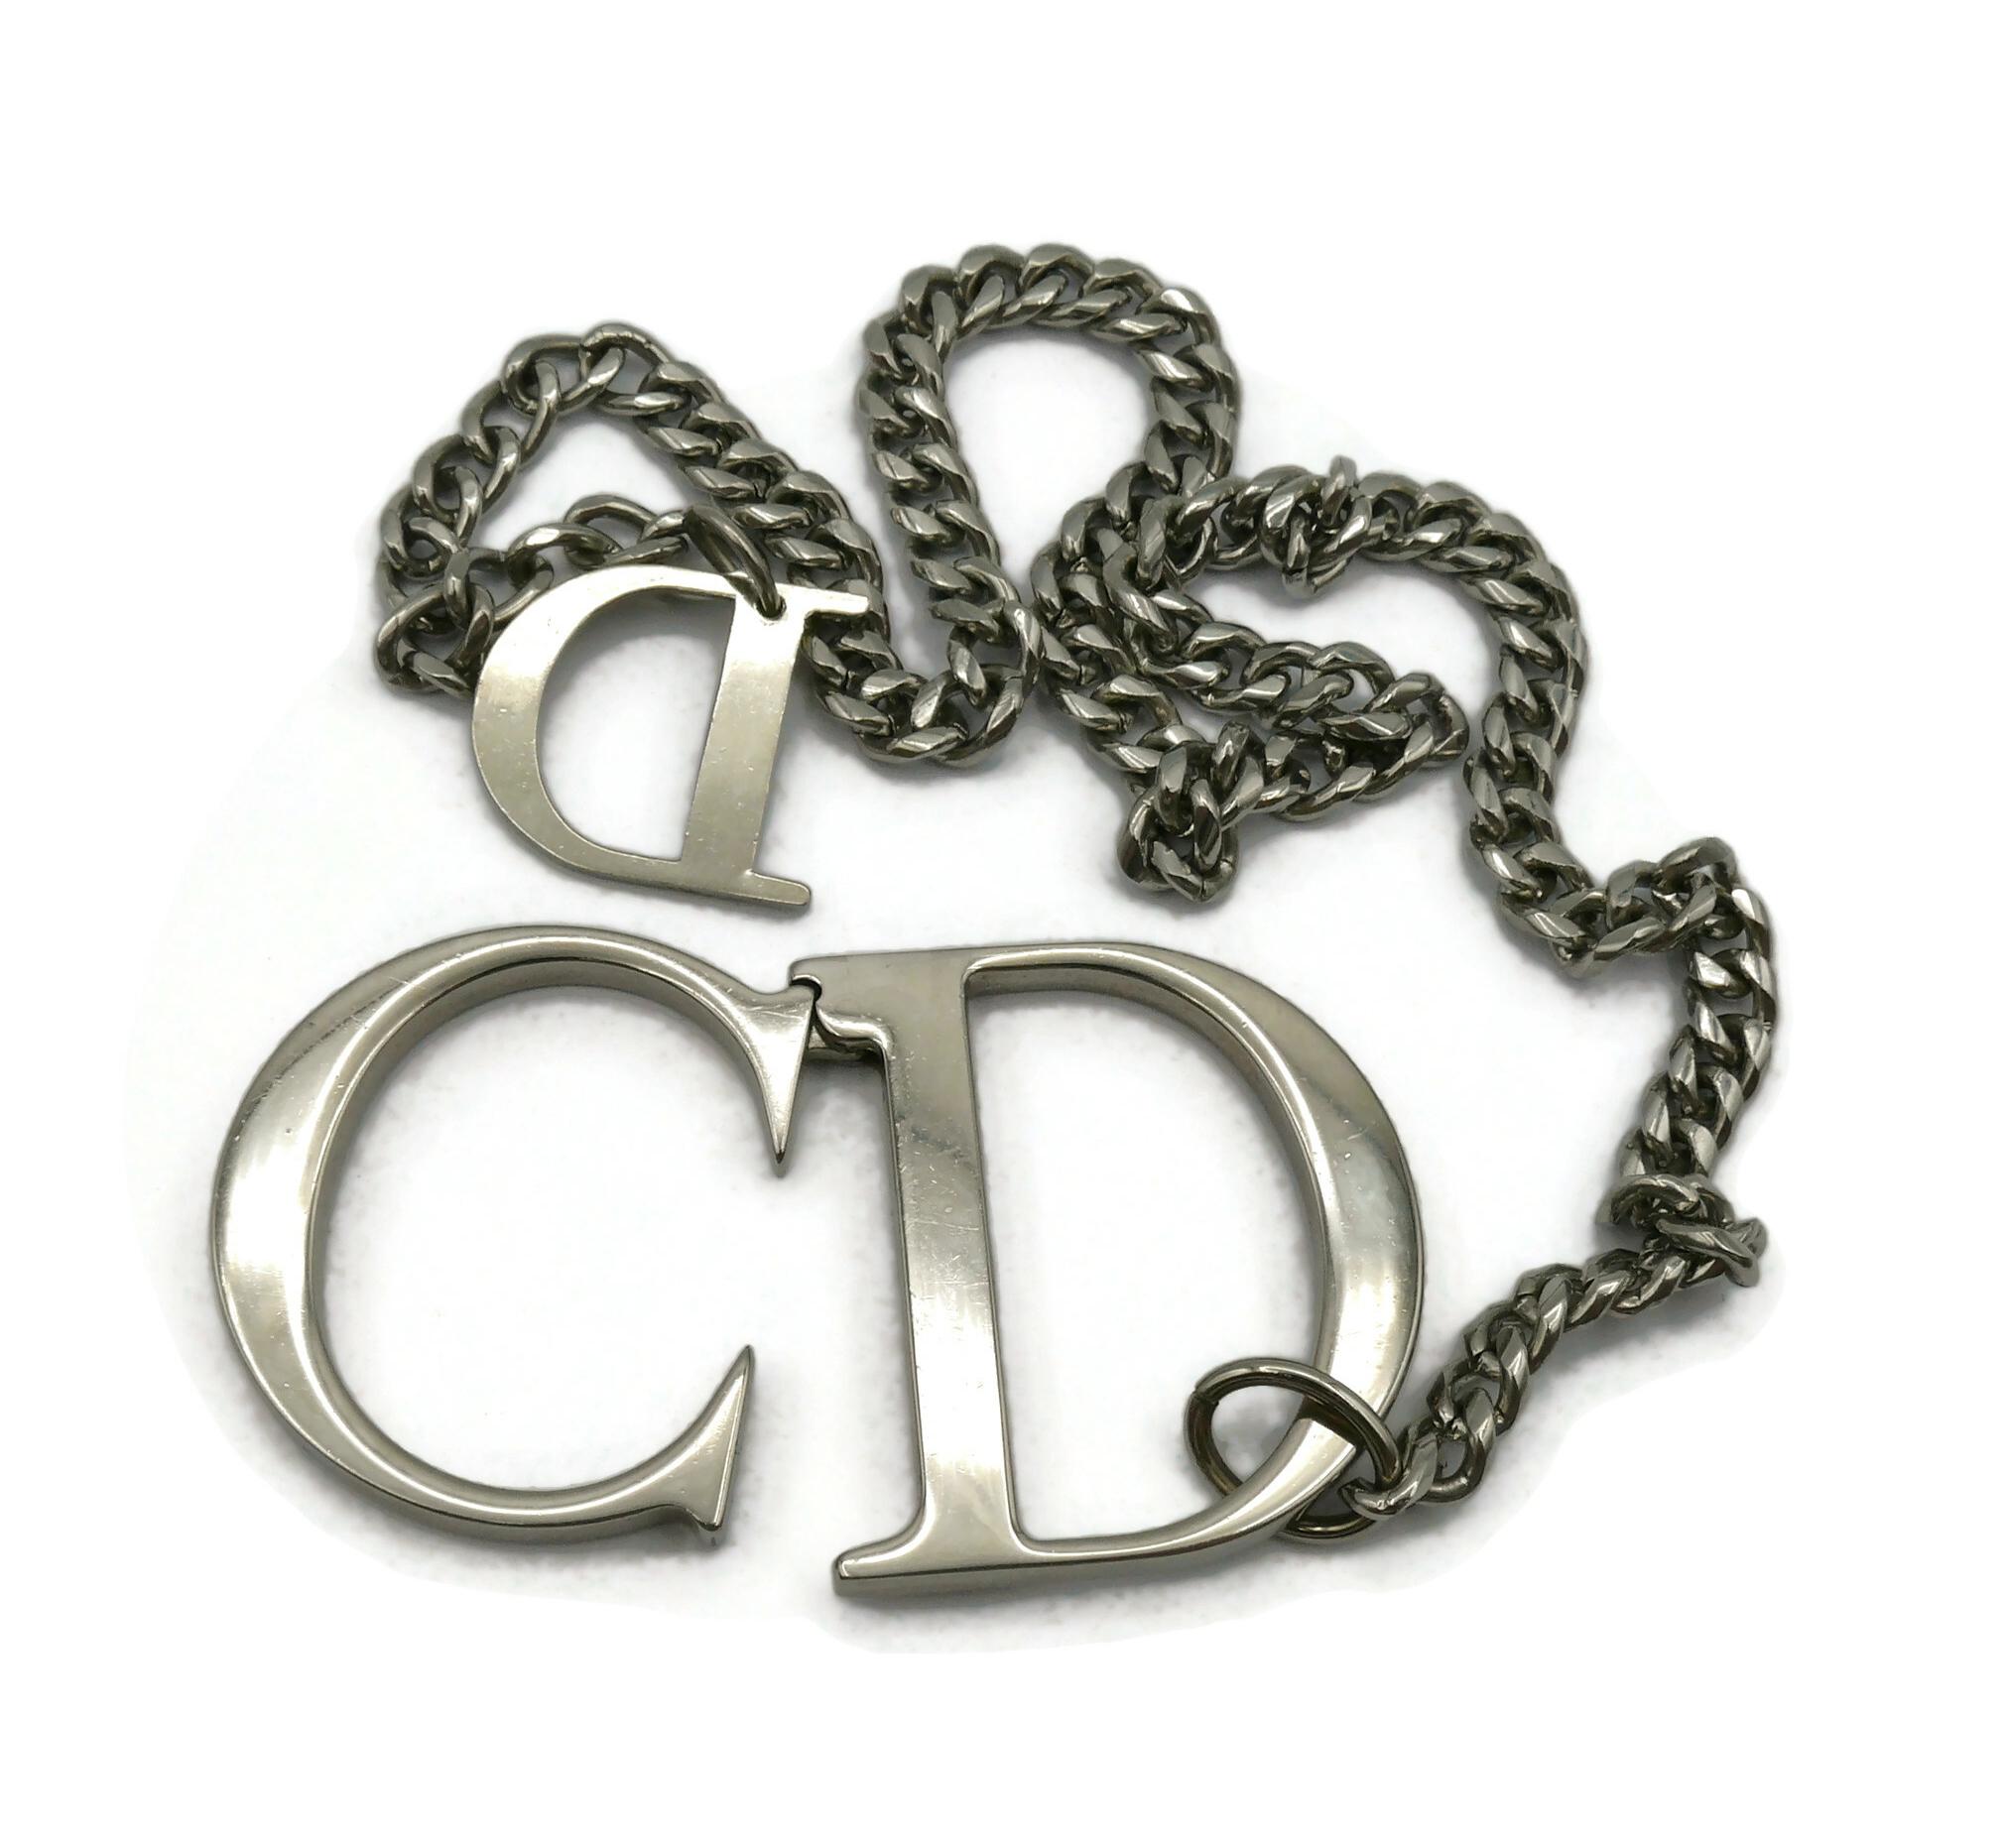 CHRISTIAND DIOR by JOHN GALLIANO Silver Tone CD Chain Necklace For Sale 3